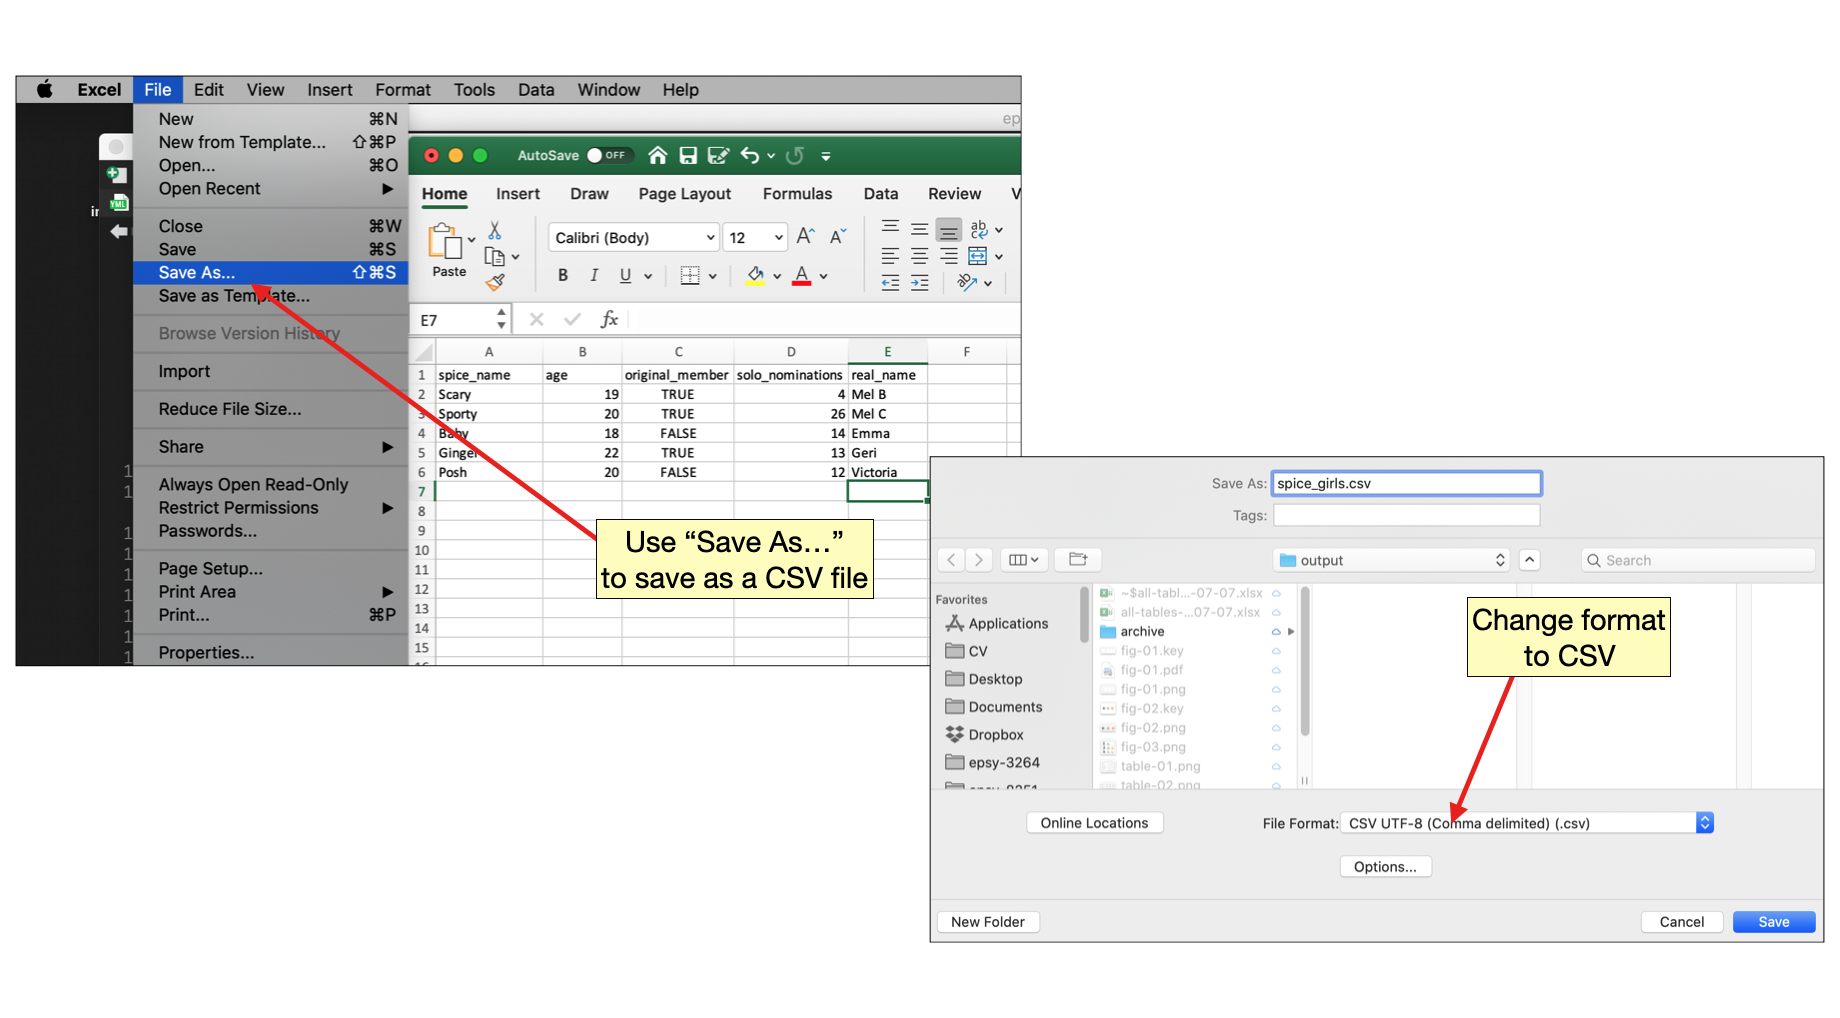 Export or save your data using the CSV file format. In Google Sheets, you can download the data as a CSV file.